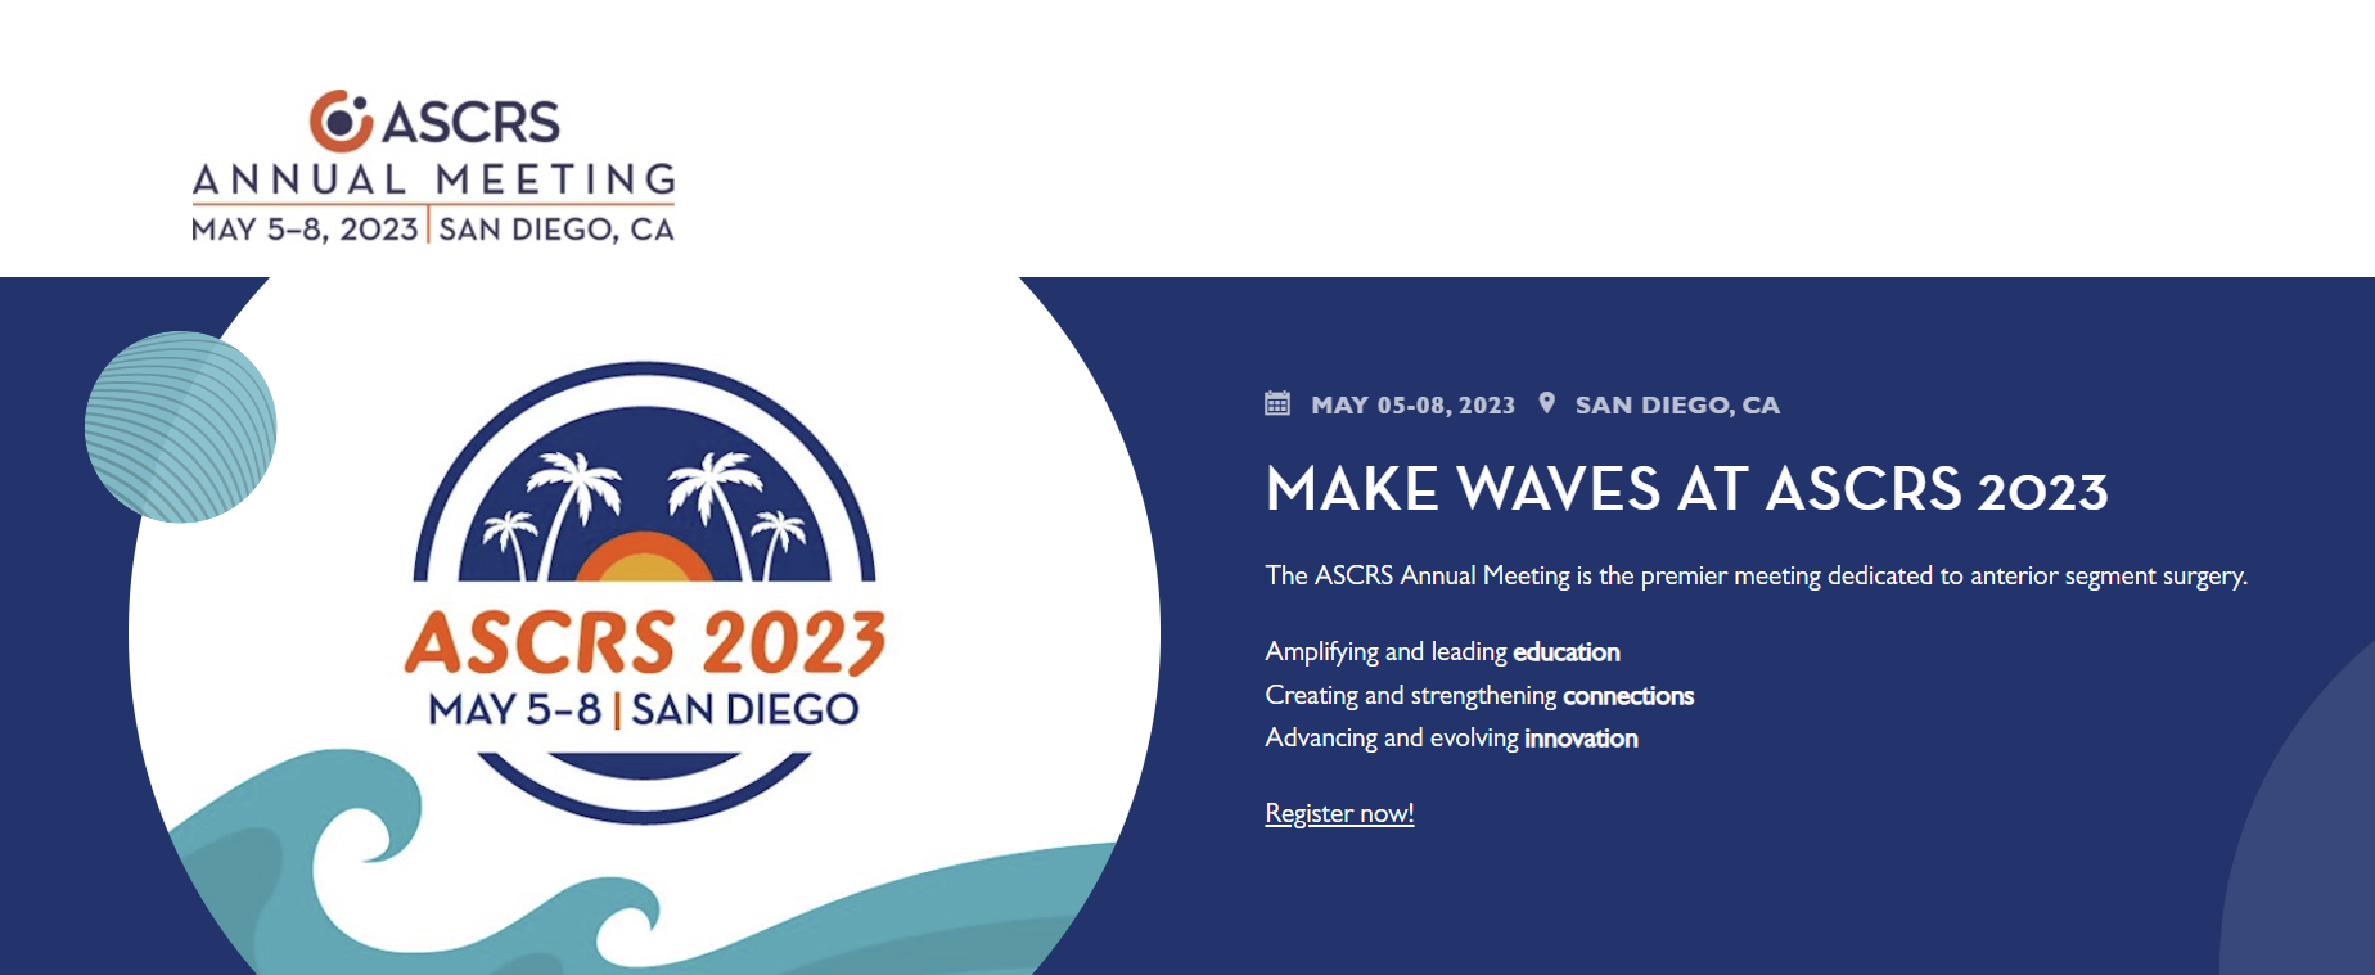 American Society of Cataract and Refractive Surgery Annual Meeting - ASCRS 2023